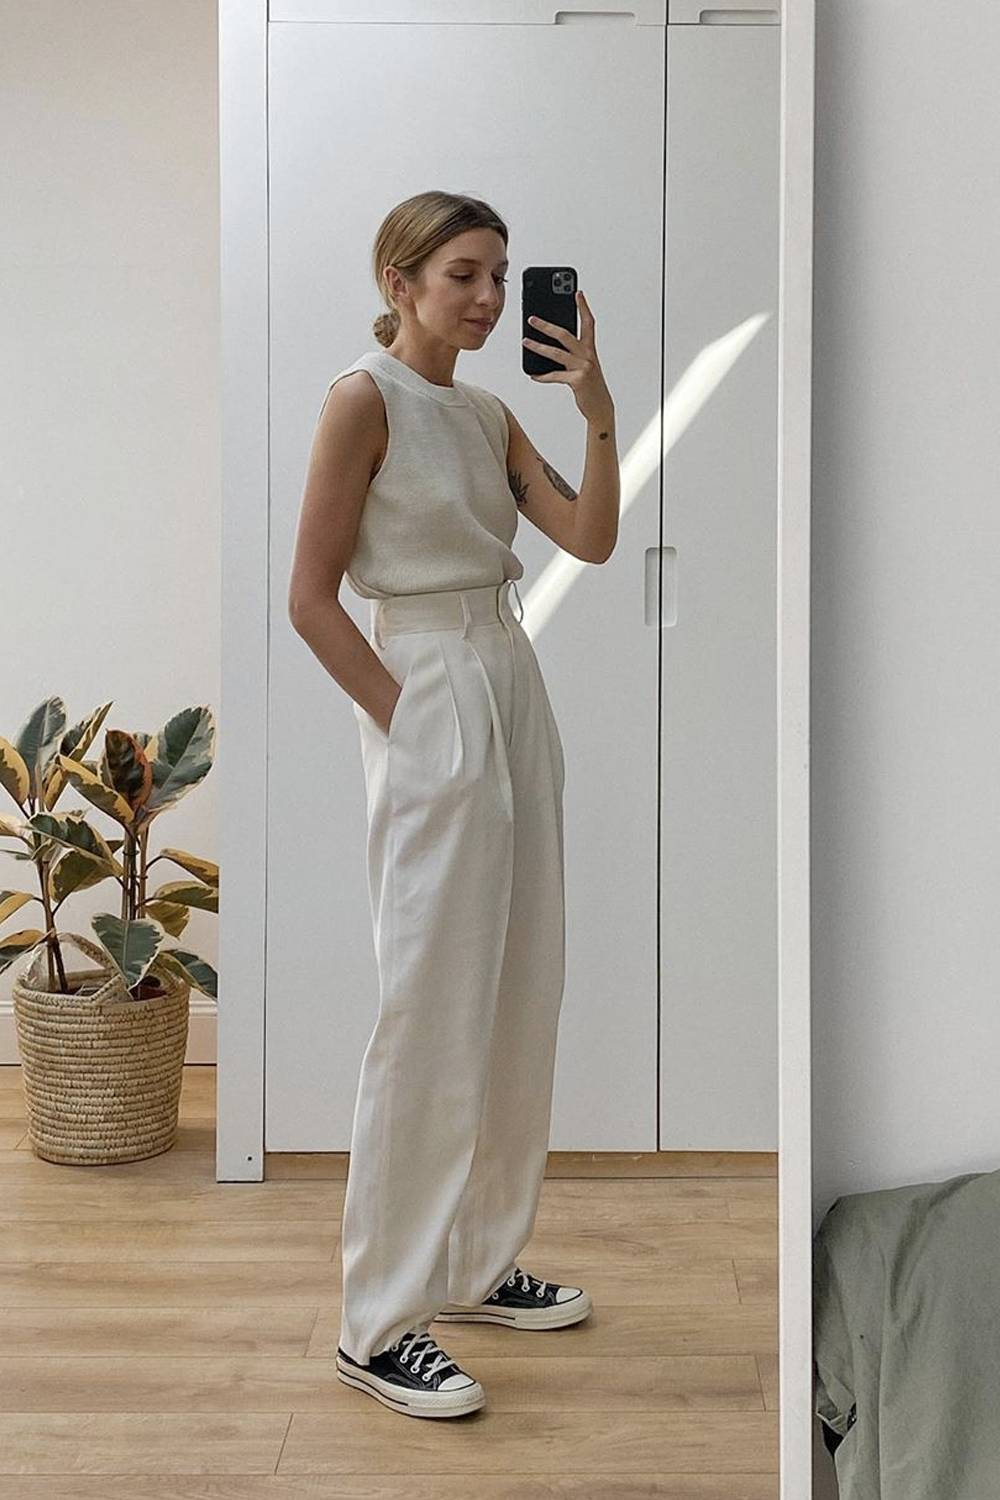 21 Outfits I Have Really Loved This Week - 21 Outfits I Have Really Loved This Week -   18 style Spring 2020 ideas